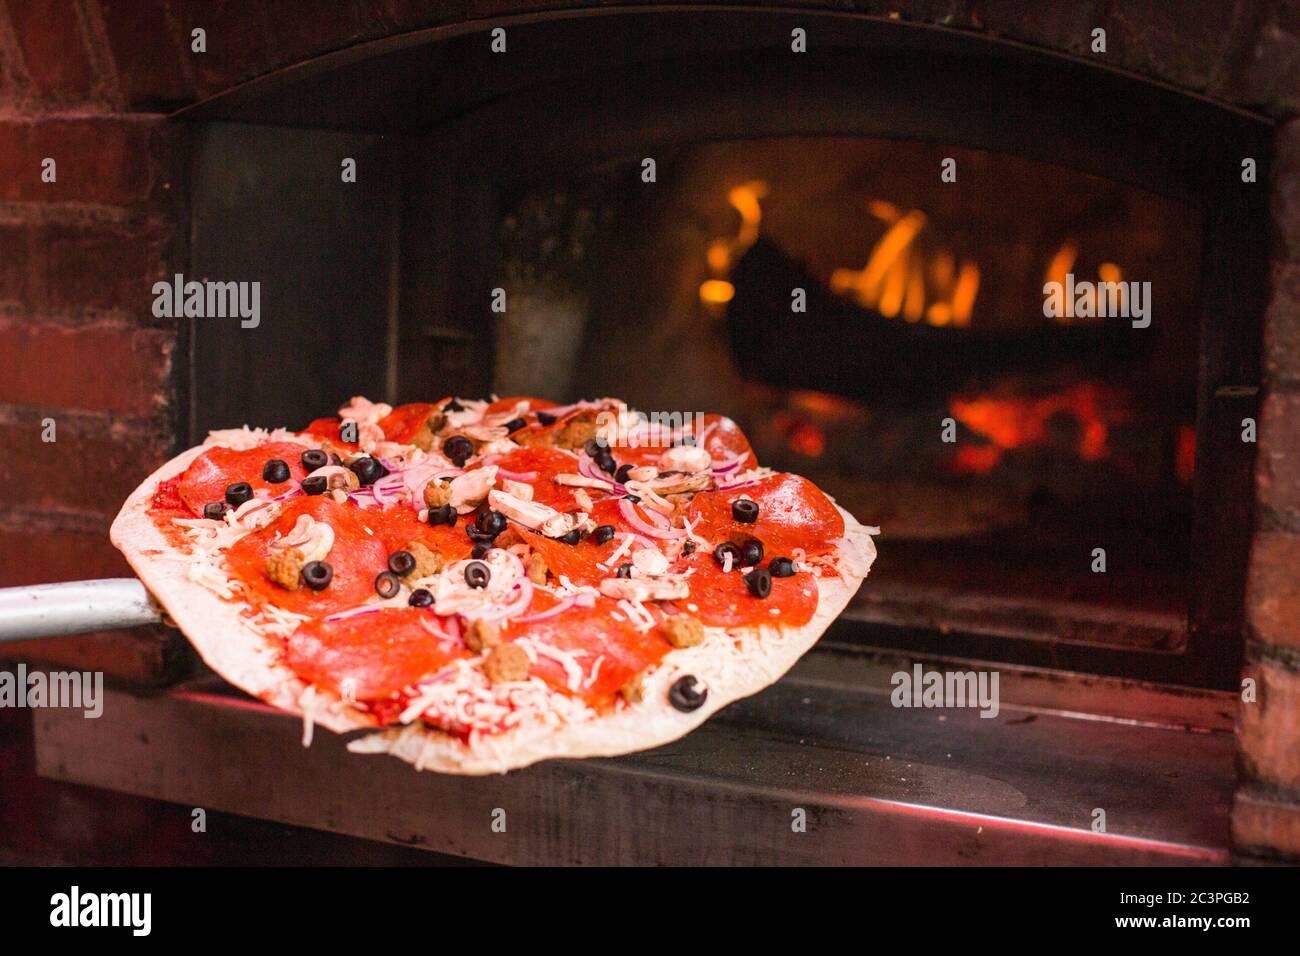 Closeup shot of a person putting a pizza in a fireplace - perfect for food concepts Stock Photo